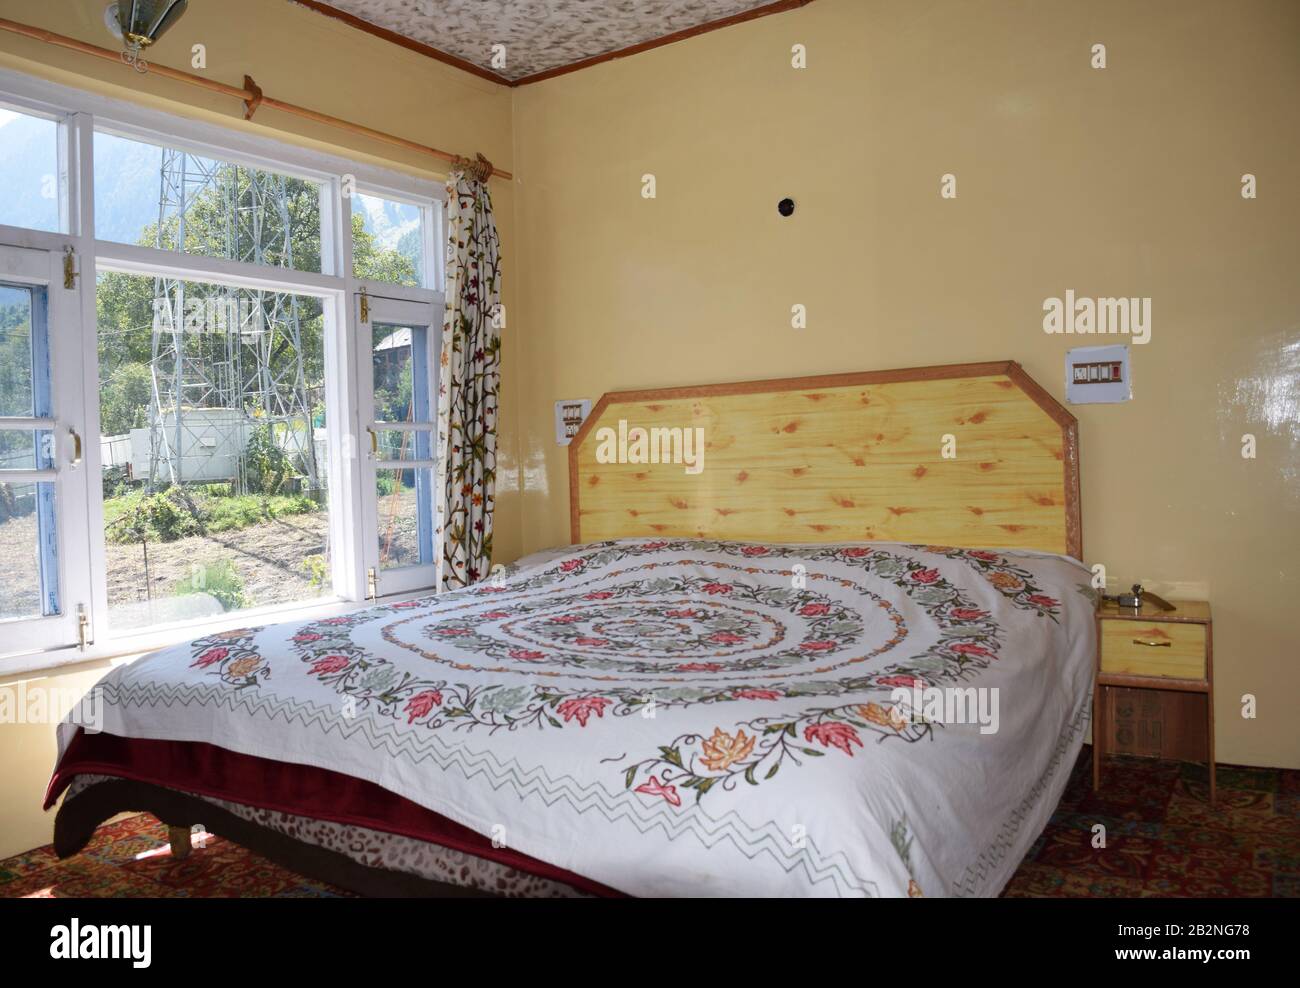 A budget hotel bedroom of an Indian hotel property Stock Photo